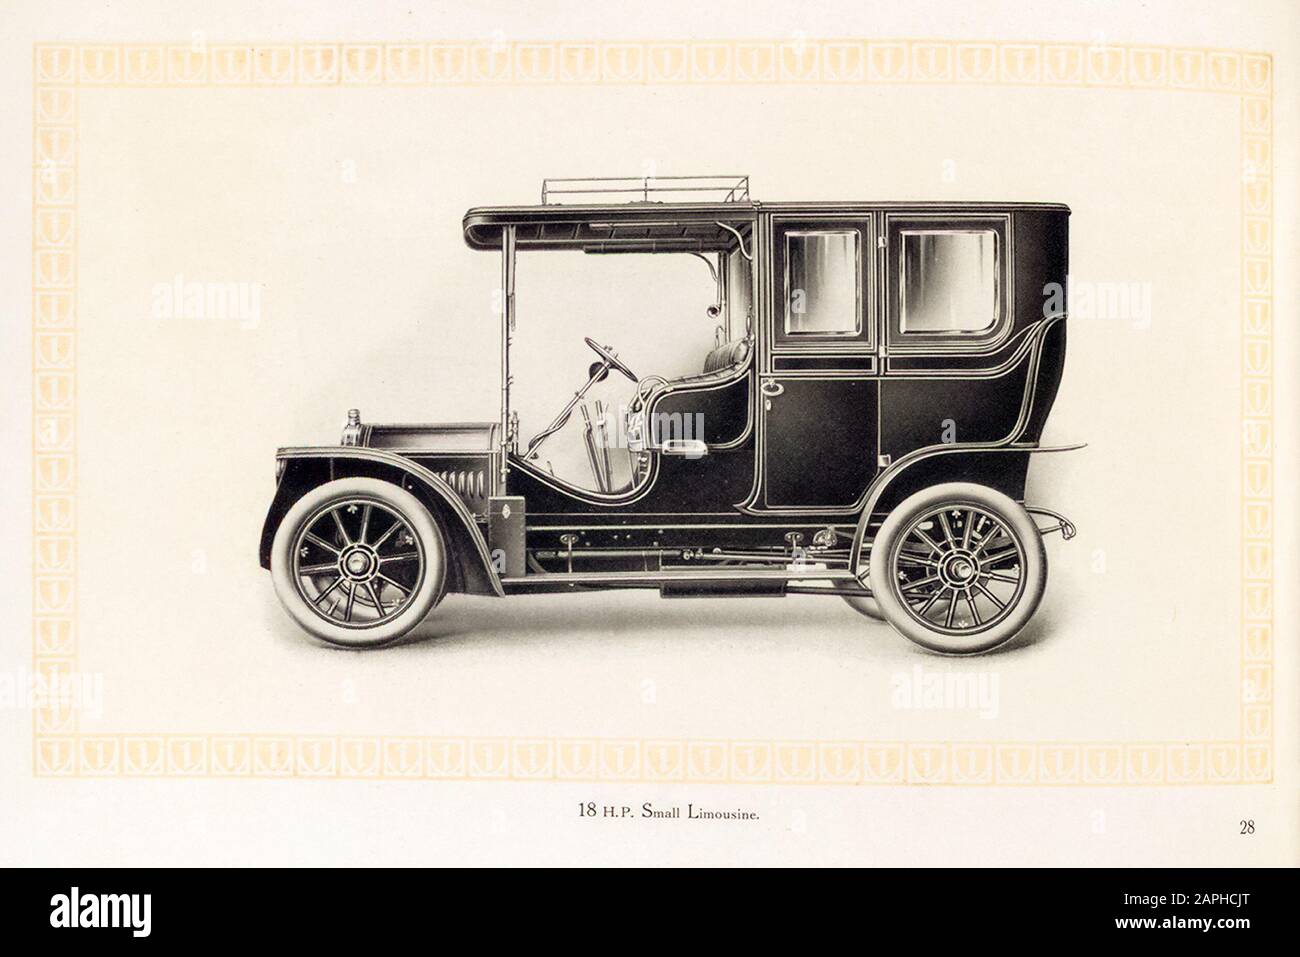 Benz motor car, 18 hp Small limousine Vintage car from the Benz & Co trade catalogue, illustration 1909 Stock Photo